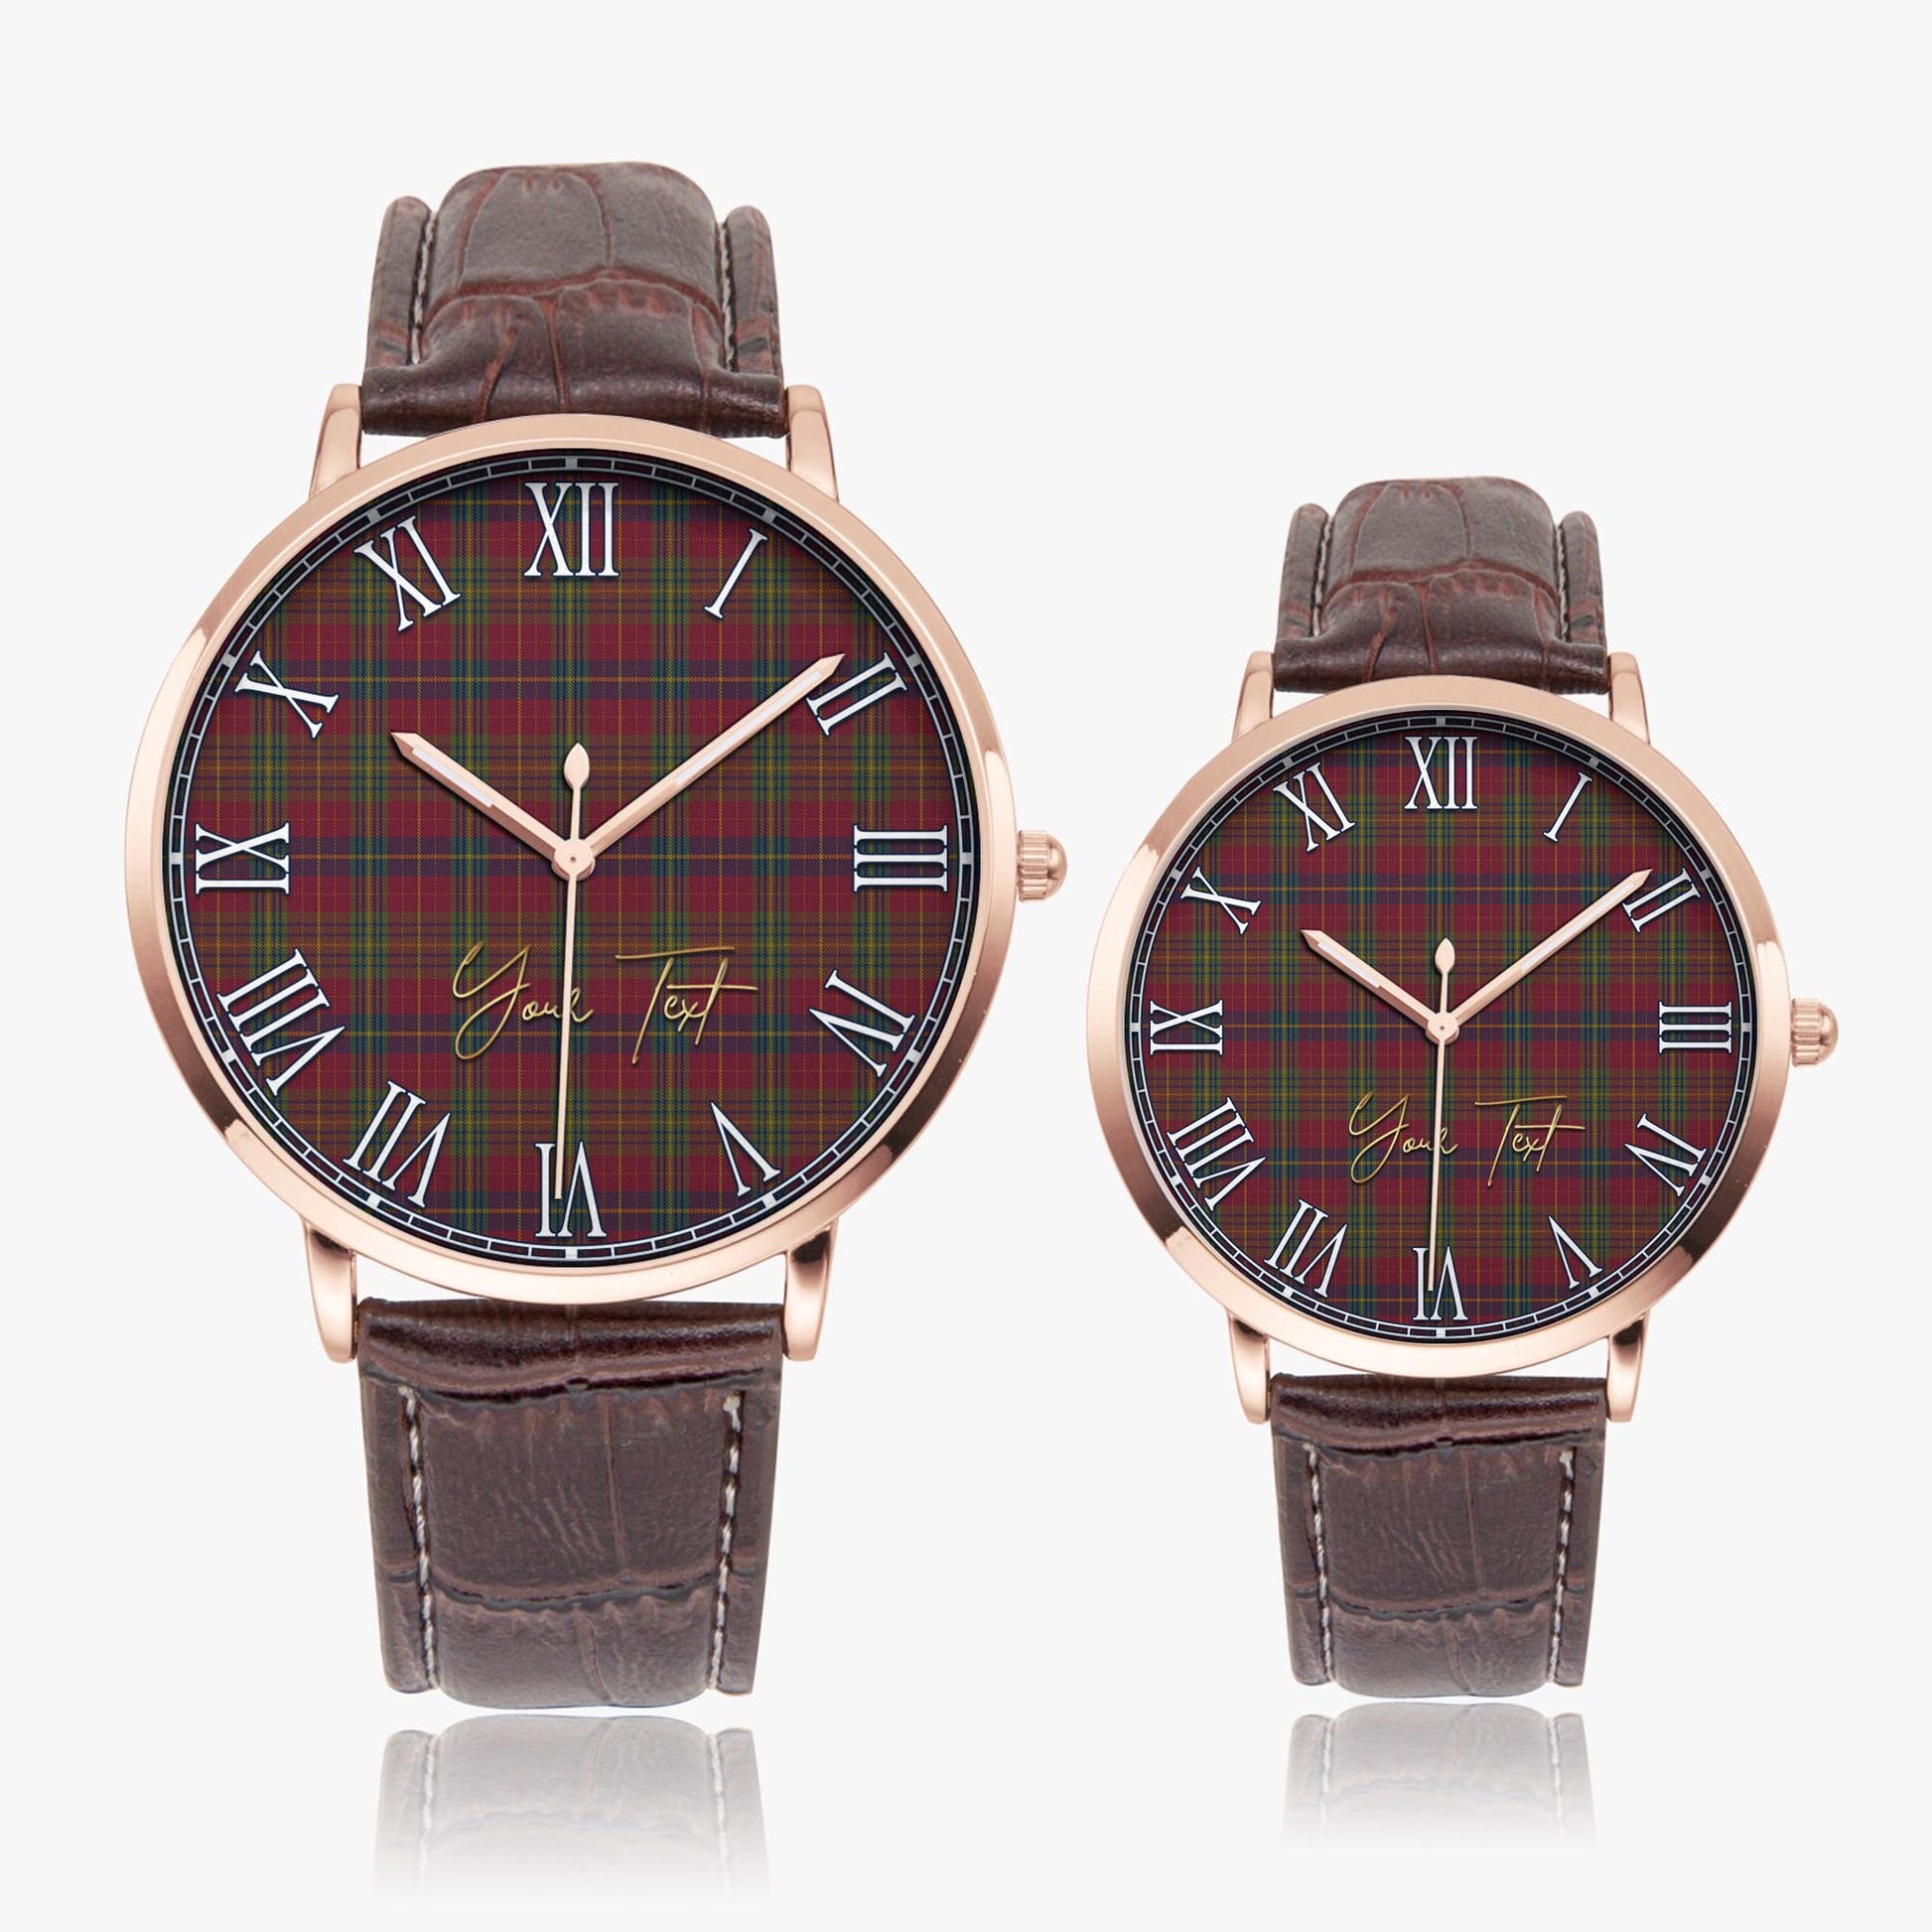 Rice of Wales Tartan Personalized Your Text Leather Trap Quartz Watch Ultra Thin Rose Gold Case With Brown Leather Strap - Tartanvibesclothing